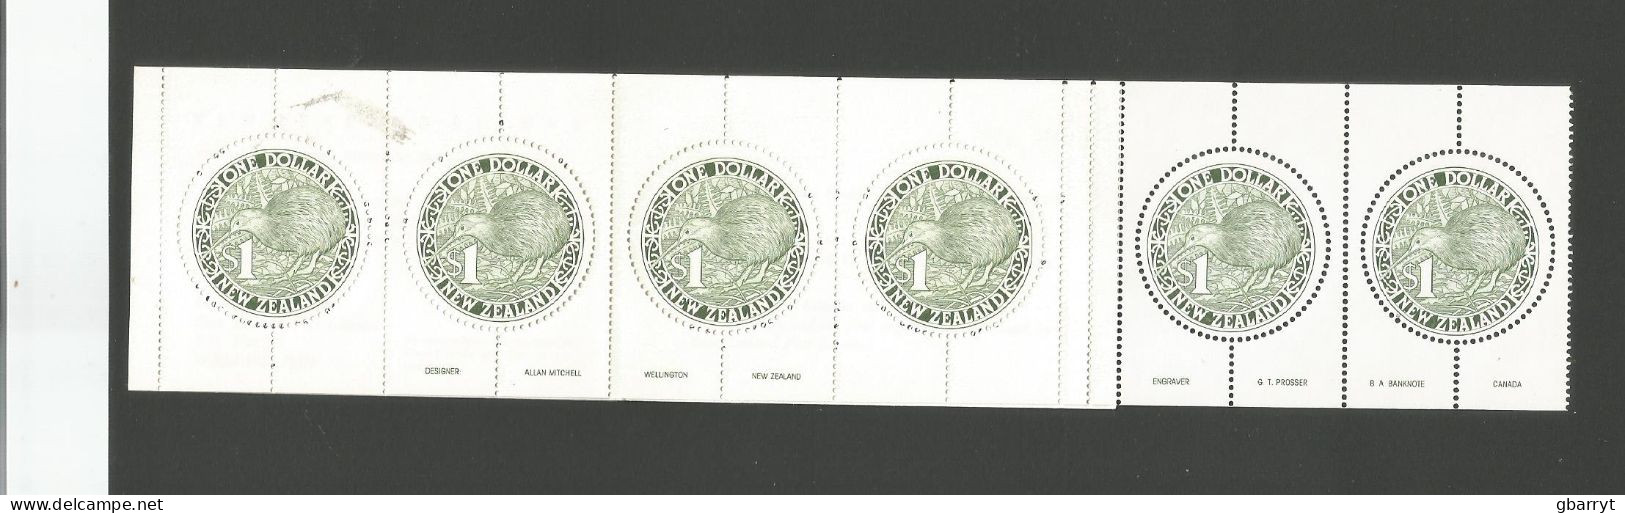 New Zealand > Booklets Scott # 918 Complete Booklet Kiwi.MNH VF.................w47 - Cuadernillos